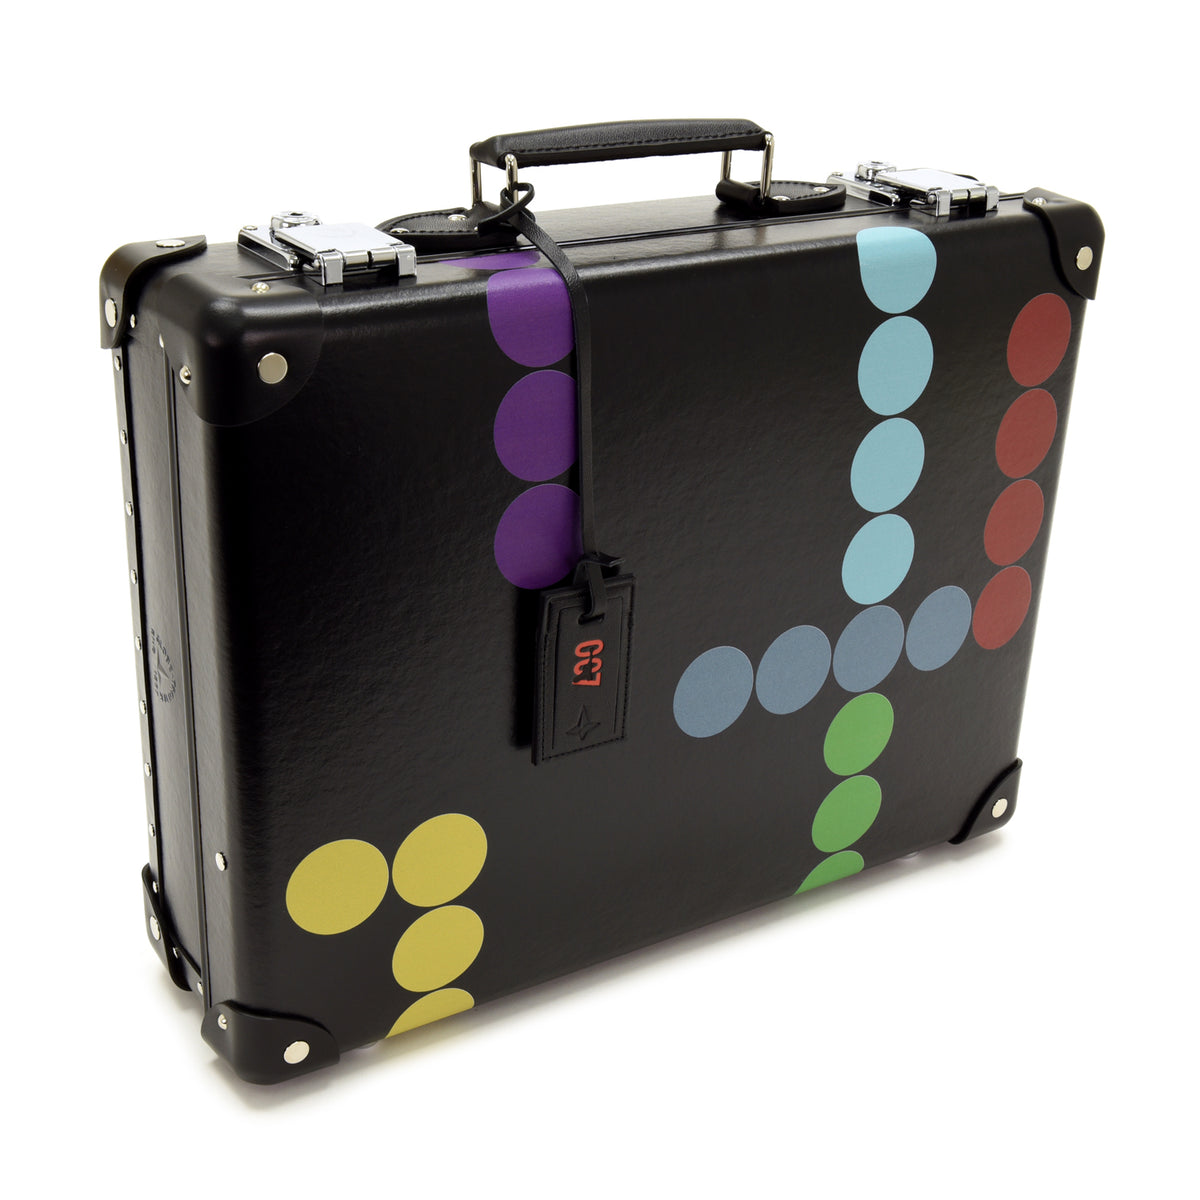 James Bond Dr. No Dots Attaché Case - 60th Anniversary Edition - By Globe-Trotter